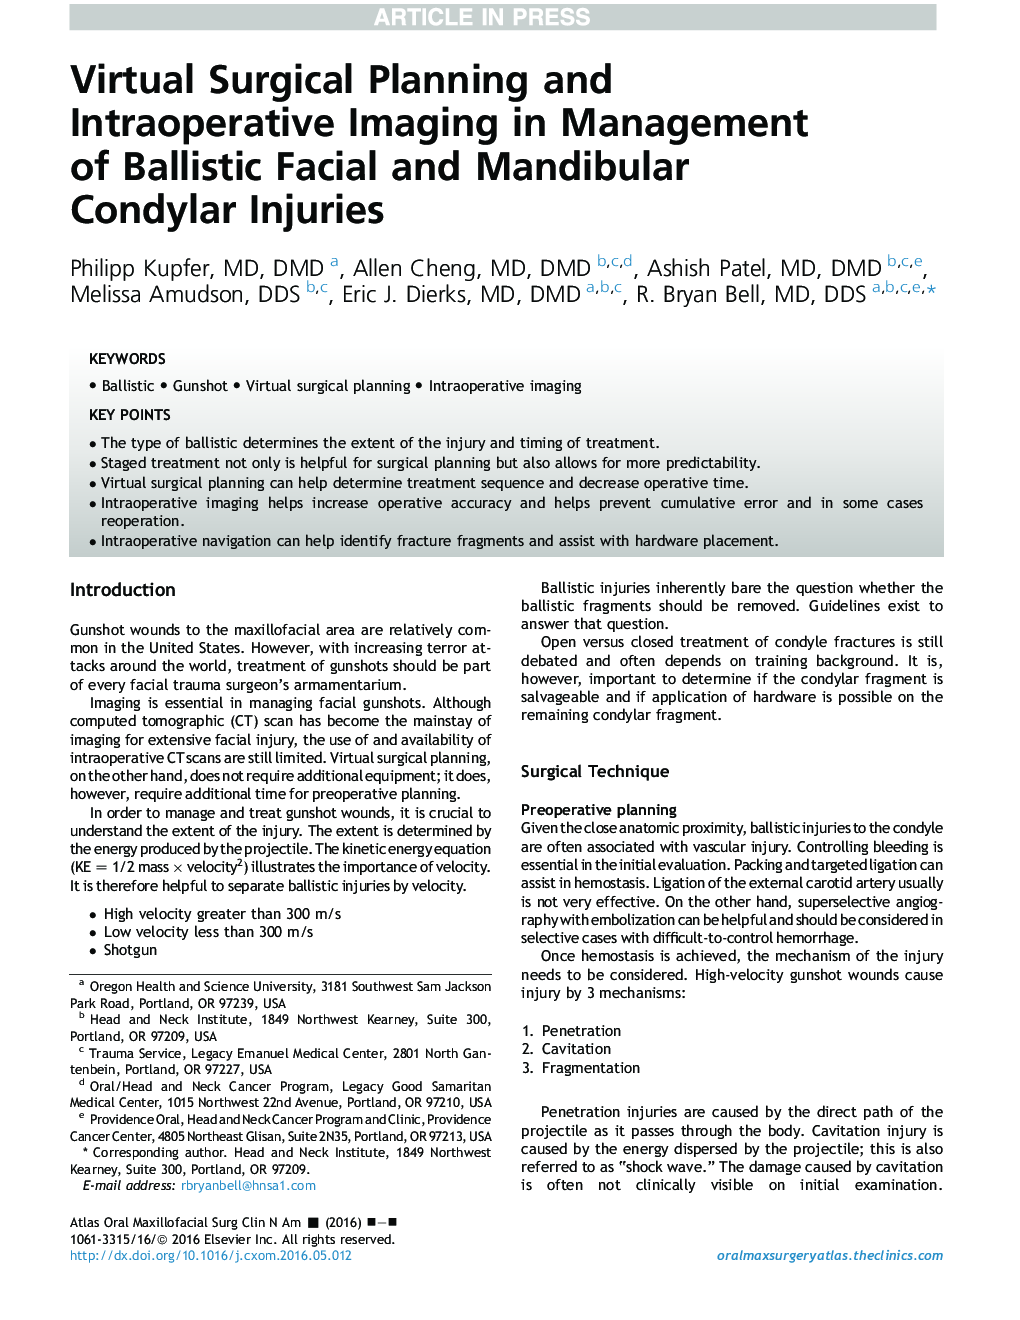 Virtual Surgical Planning and Intraoperative Imaging in Management of Ballistic Facial and Mandibular Condylar Injuries